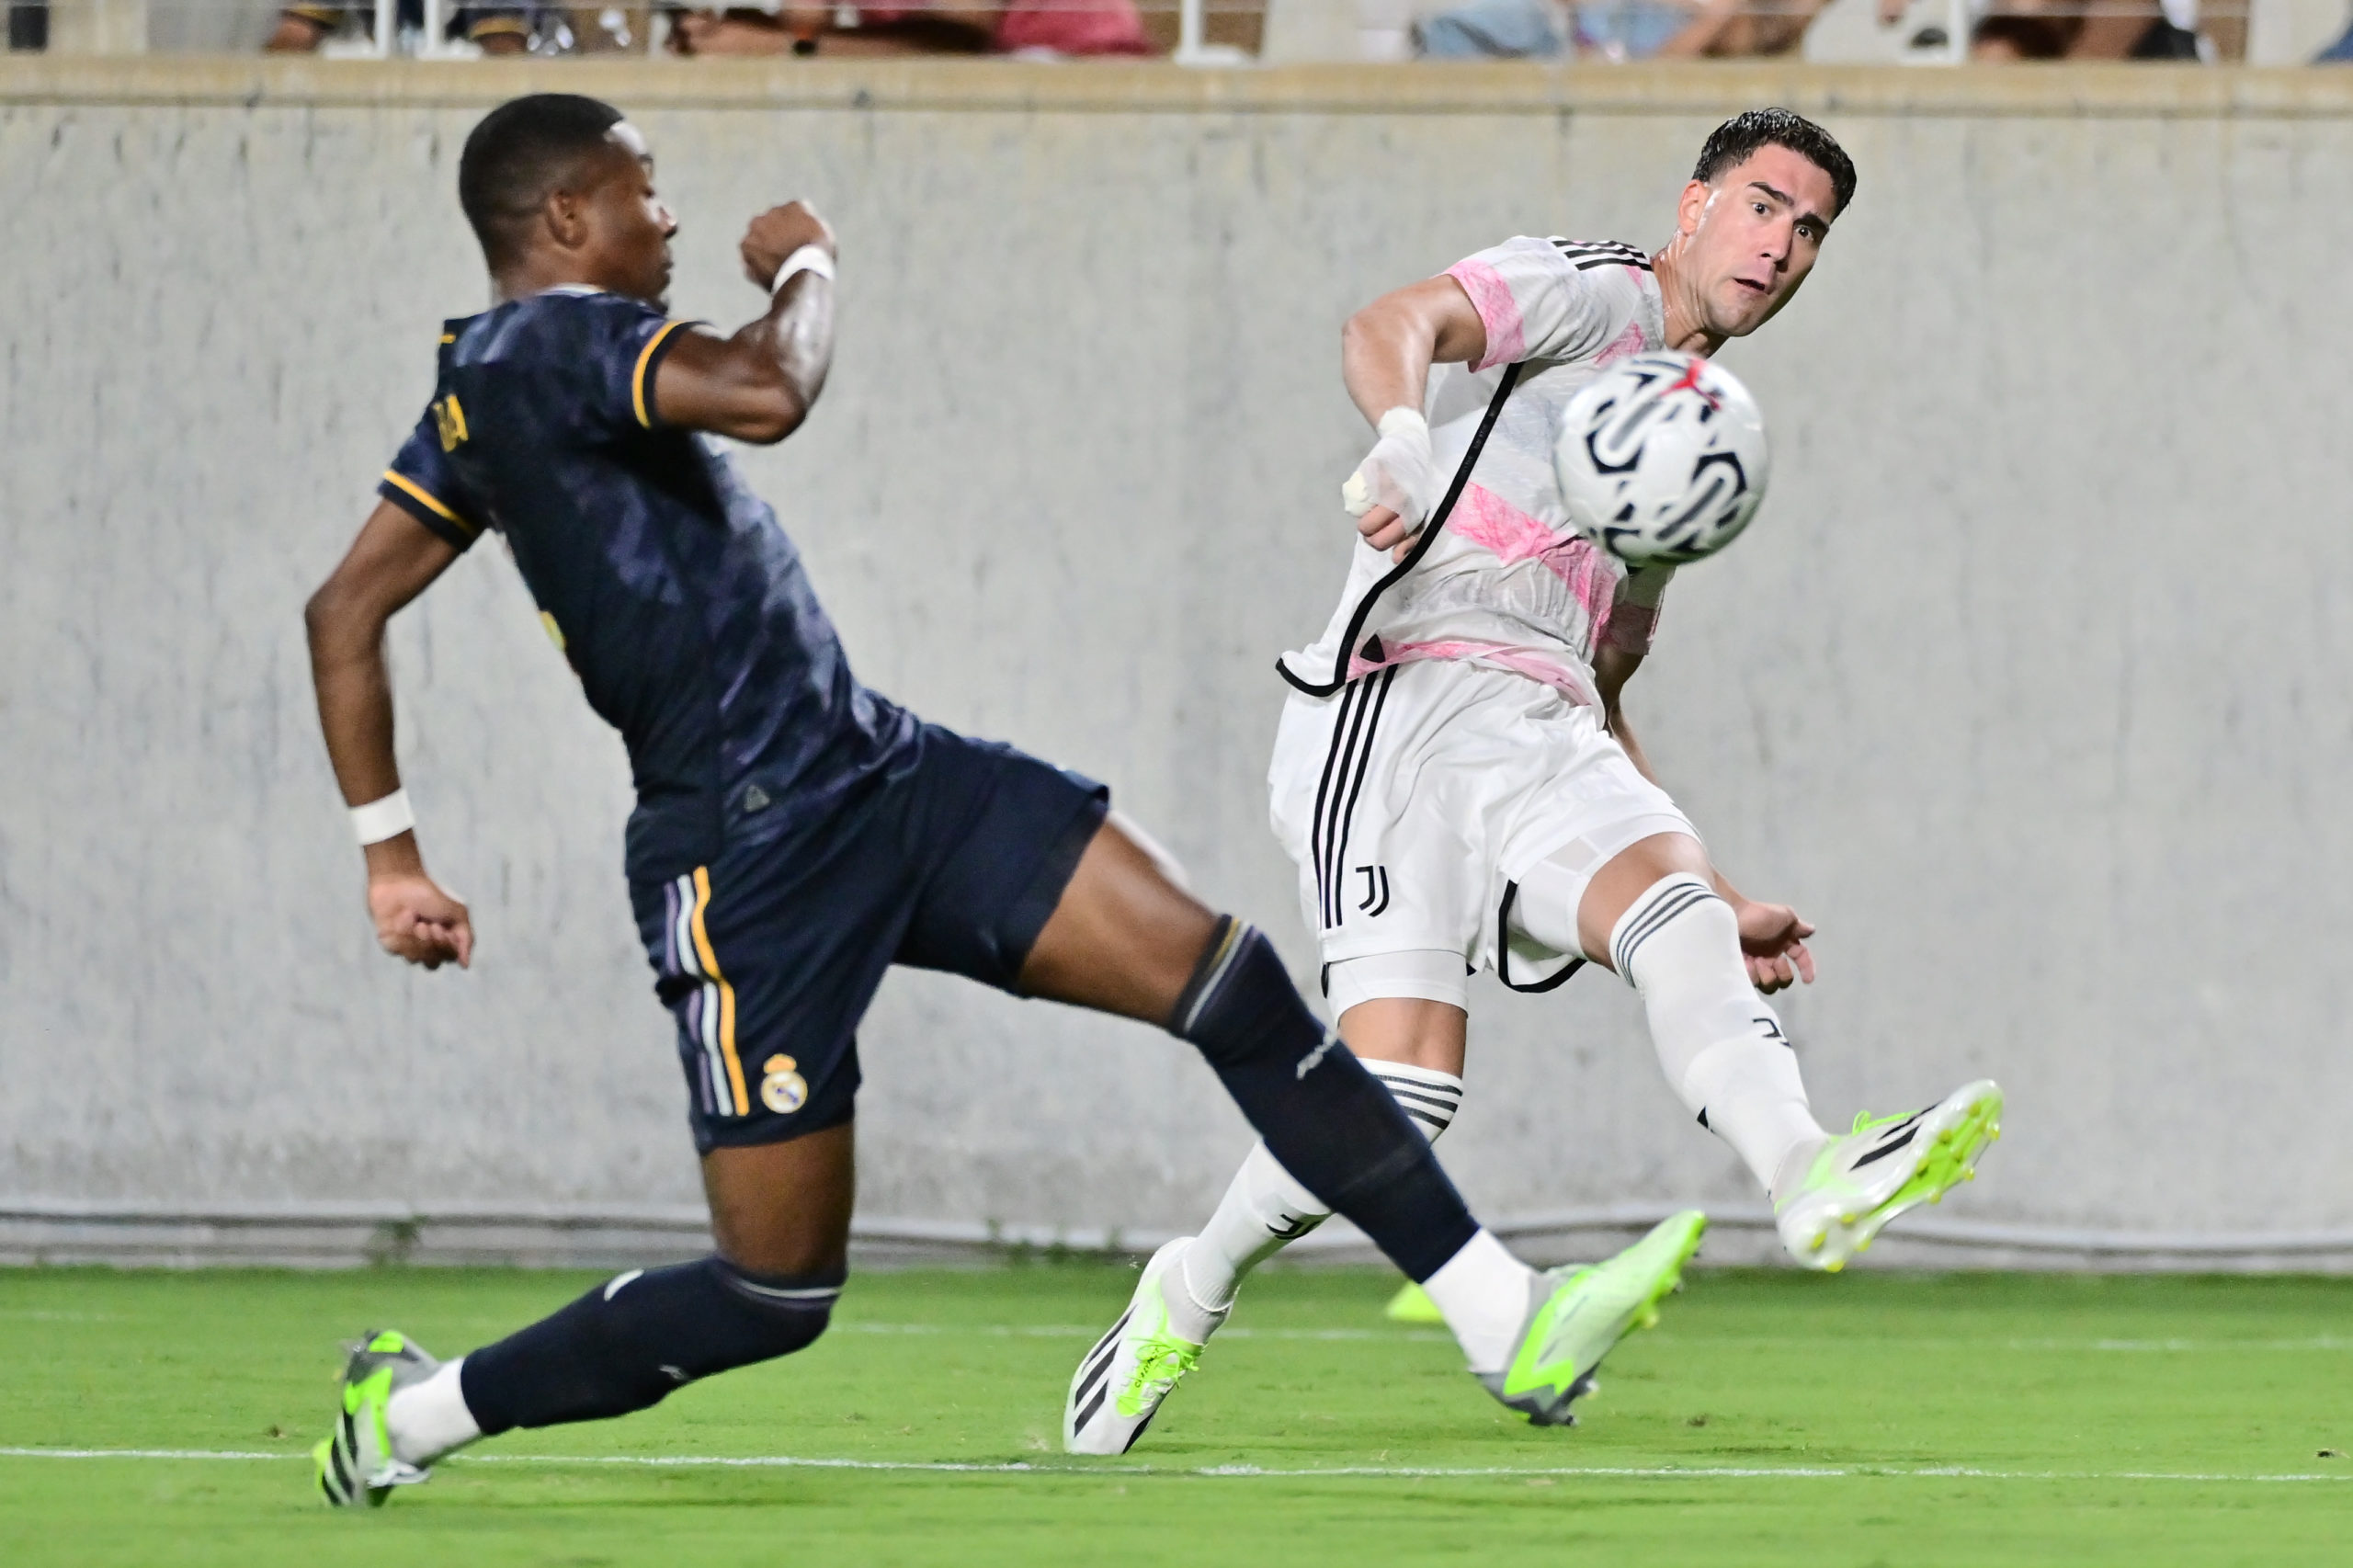 ORLANDO, FLORIDA - AUGUST 02: Dušan Vlahović #9 of Juventus passes the ball against David Alaba #4 of Real Madrid in the second half of a pre-season friendly match at Camping World Stadium on August 02, 2023 in Orlando, Florida. (Photo by Julio Aguilar/Getty Images)